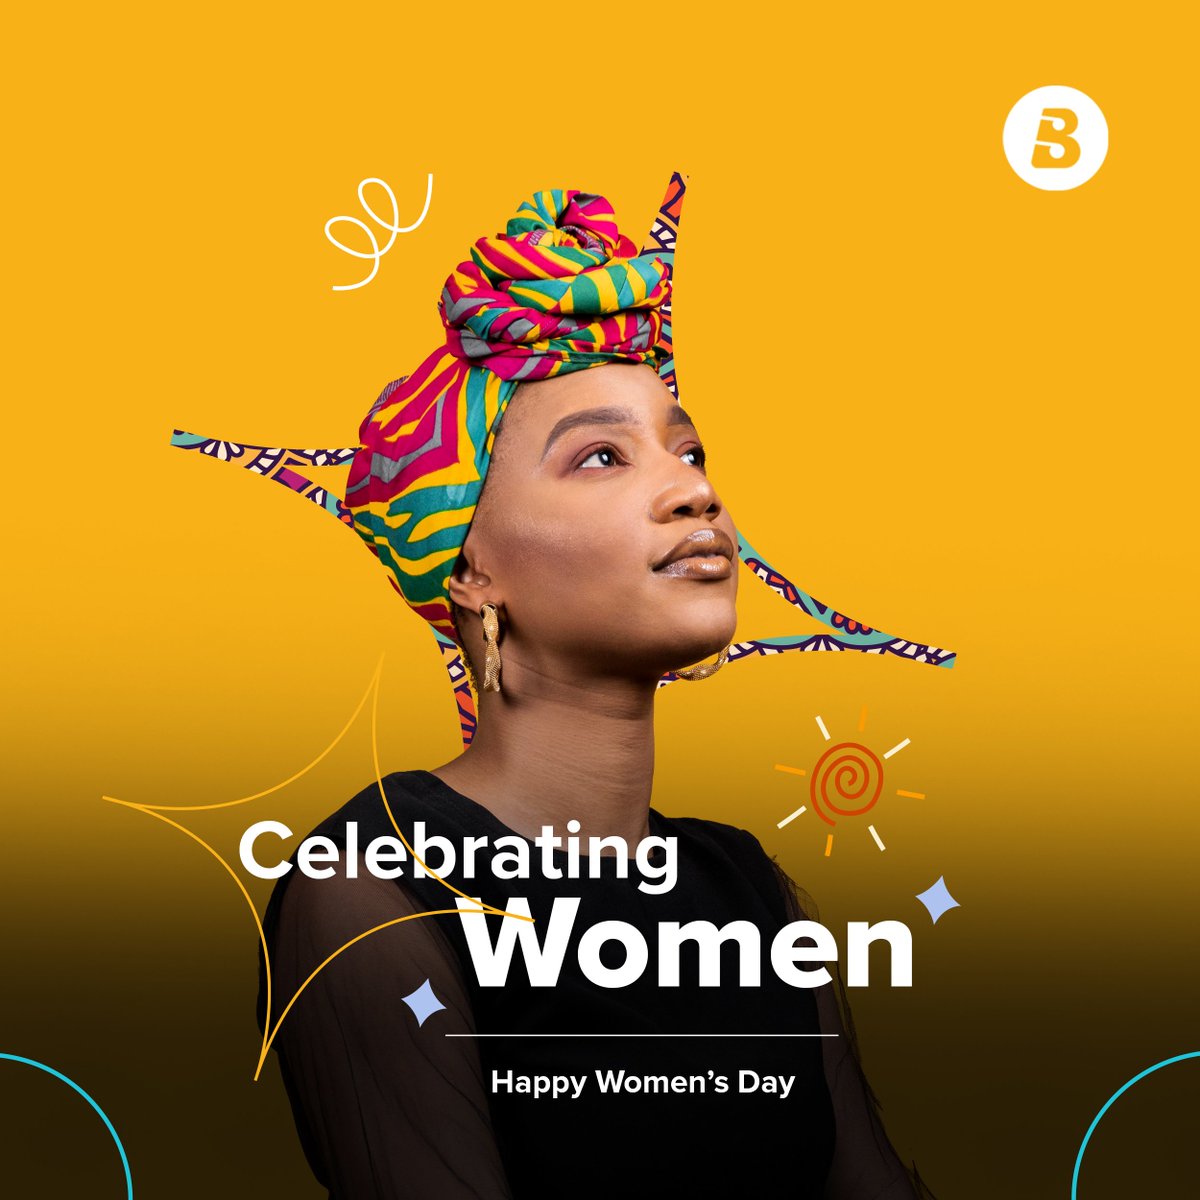 We acknowledge and appreciate the contributions and achievements of female artists in Uganda. #happywomensday